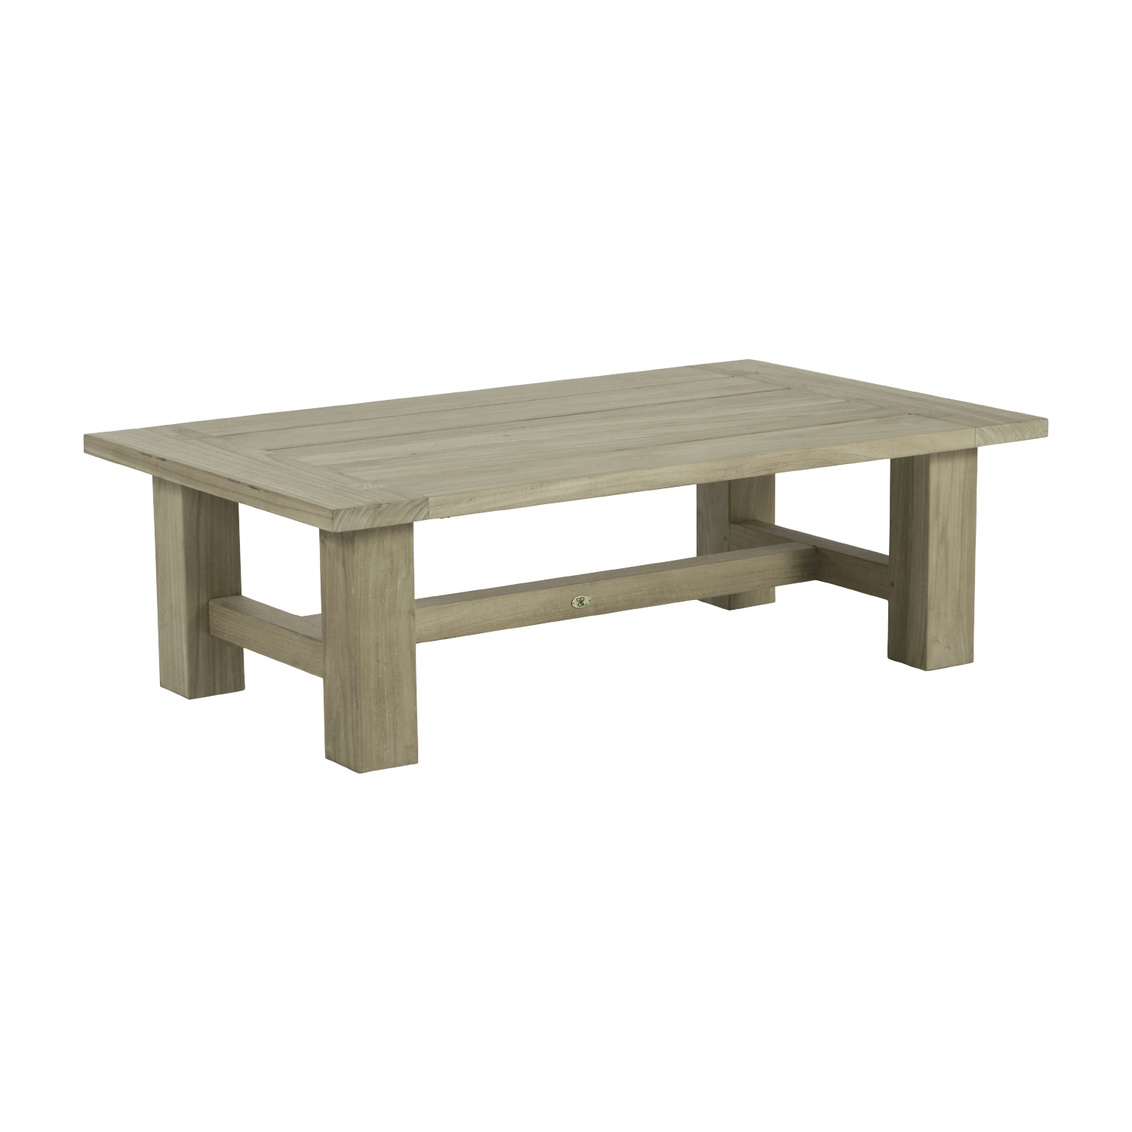 croquet teak rectangular coffee table in oyster teak product image